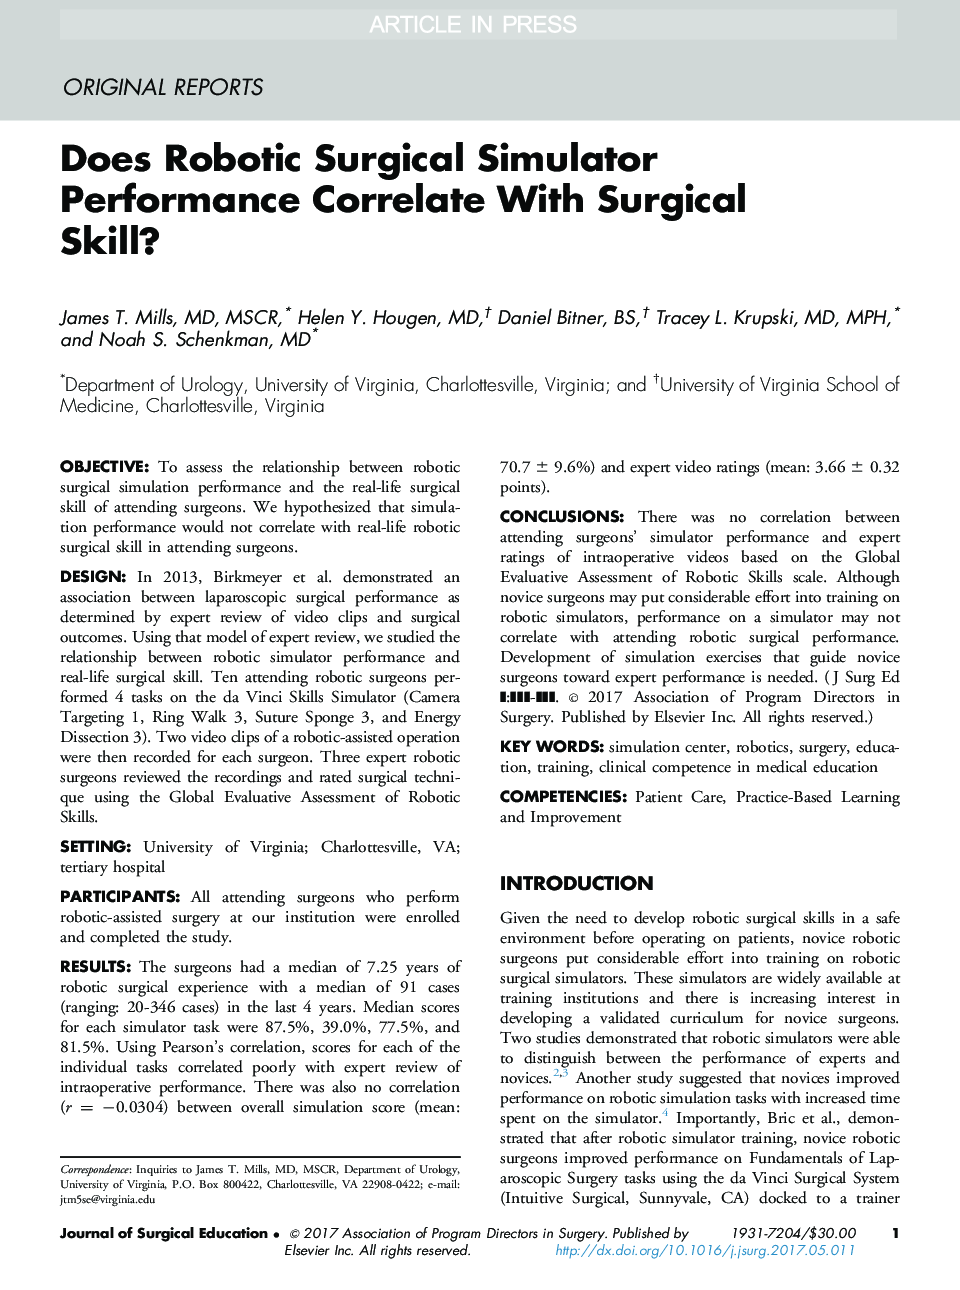 Does Robotic Surgical Simulator Performance Correlate With Surgical Skill?